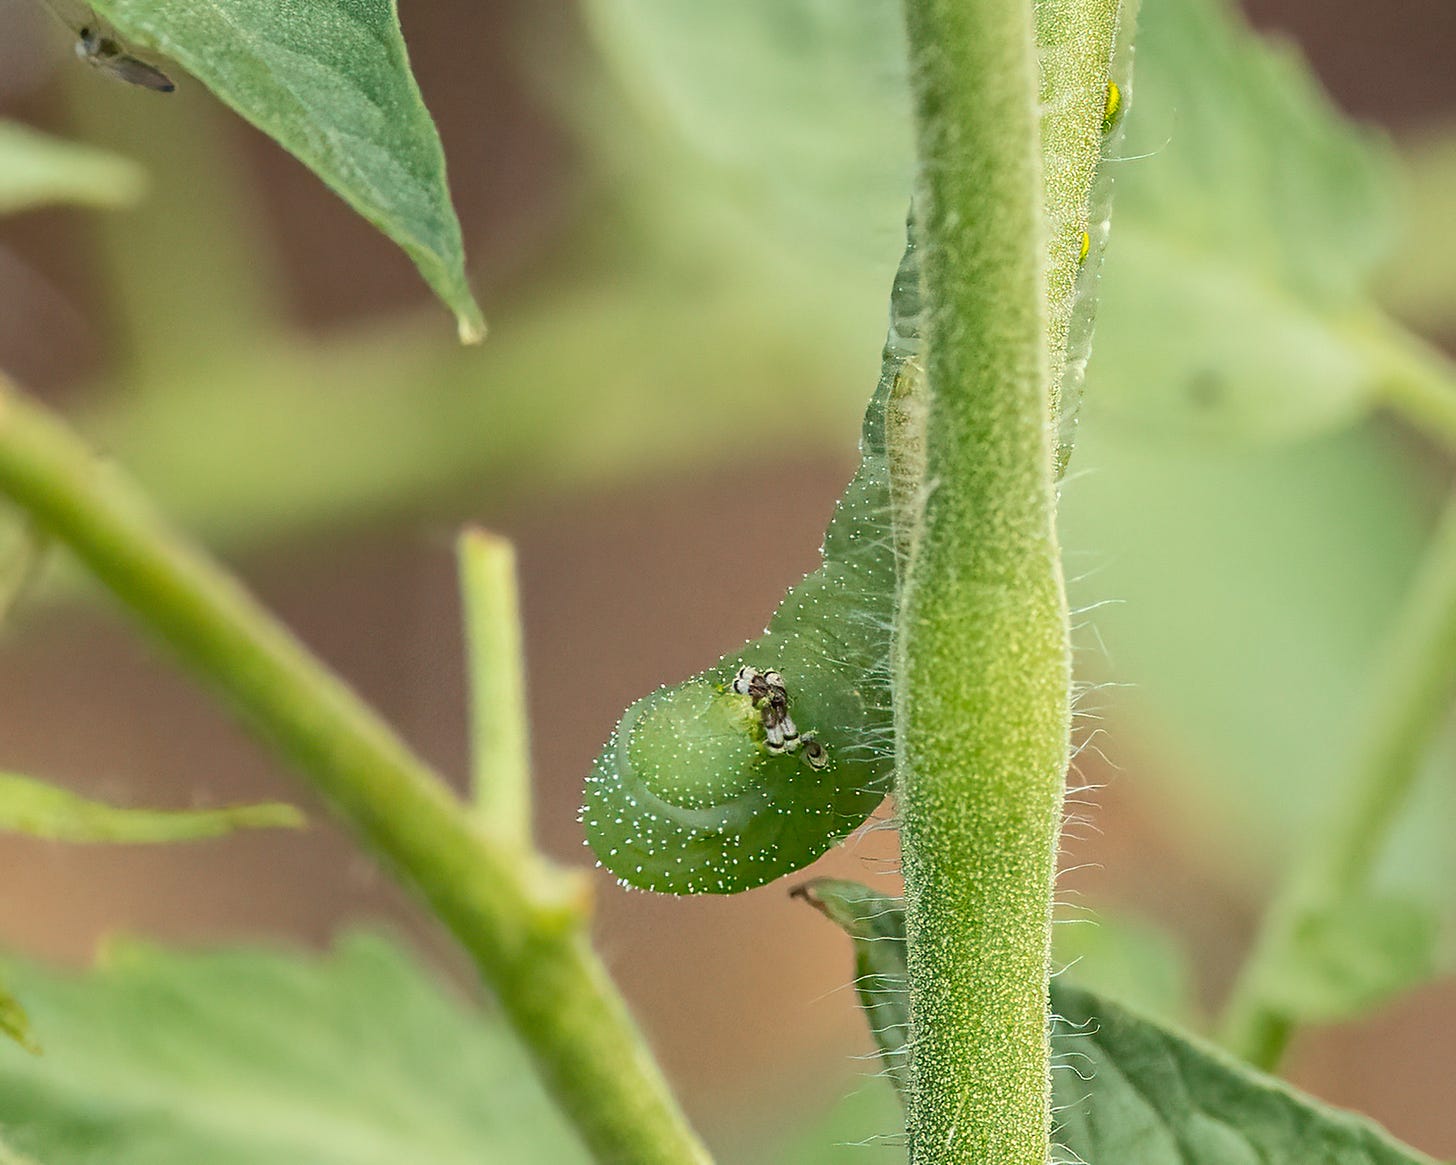 A tomato hornworm is climbing head-down on a tomato plant stalk. The hornworm is a bright green with silvery specks all over it. It's head is raised and its first set of arms are folded together as if in prayer.